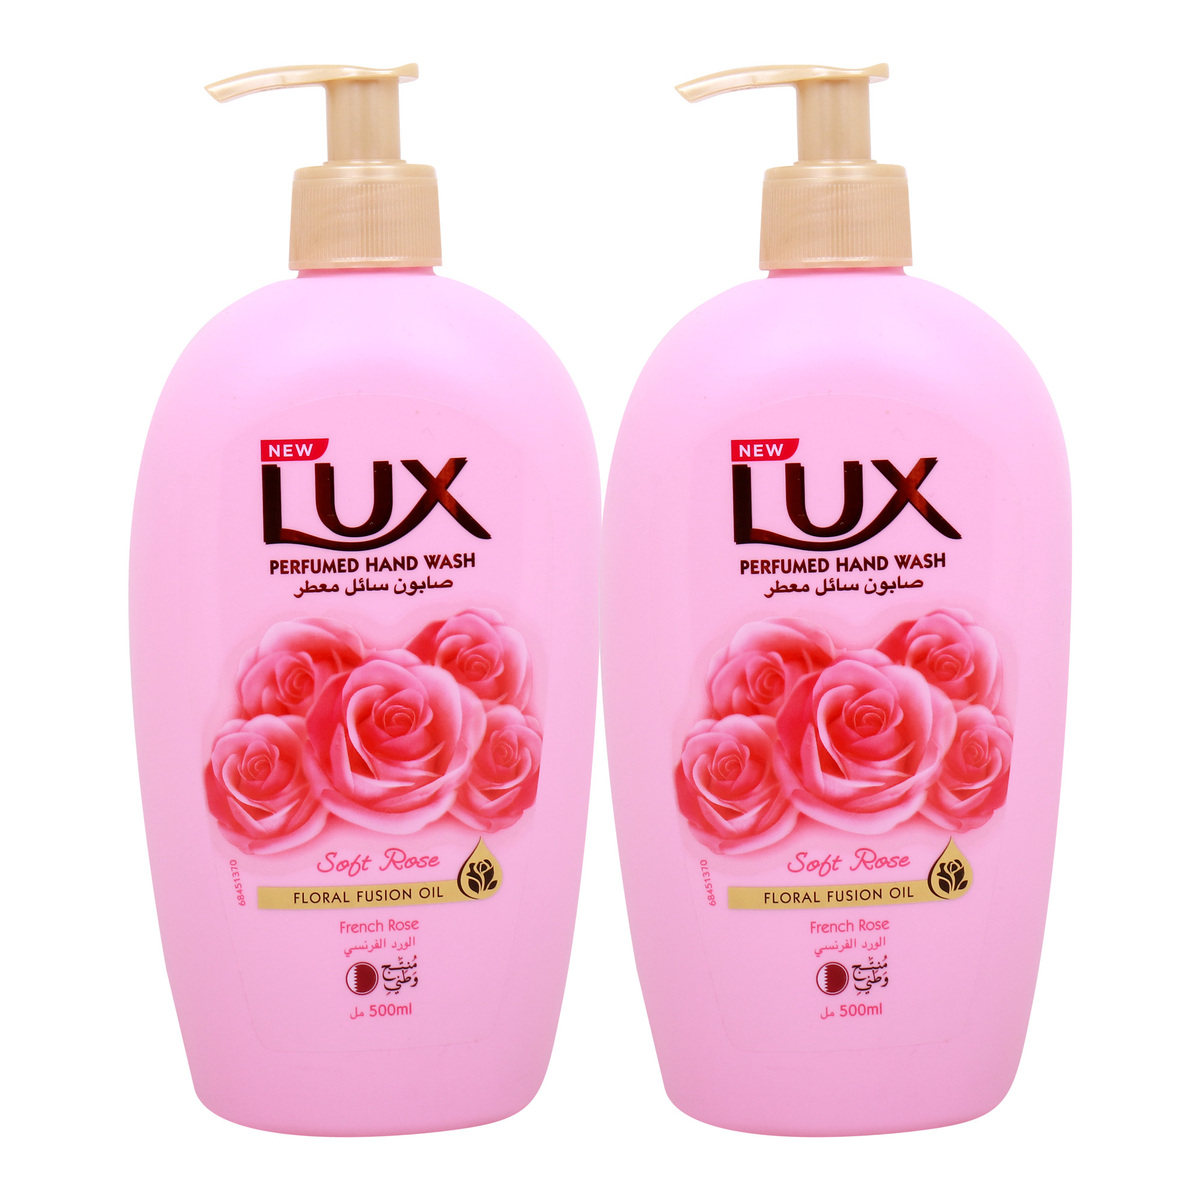 Lux Perfumed Hand Wash, Soft Rose, 2 x 500 ml